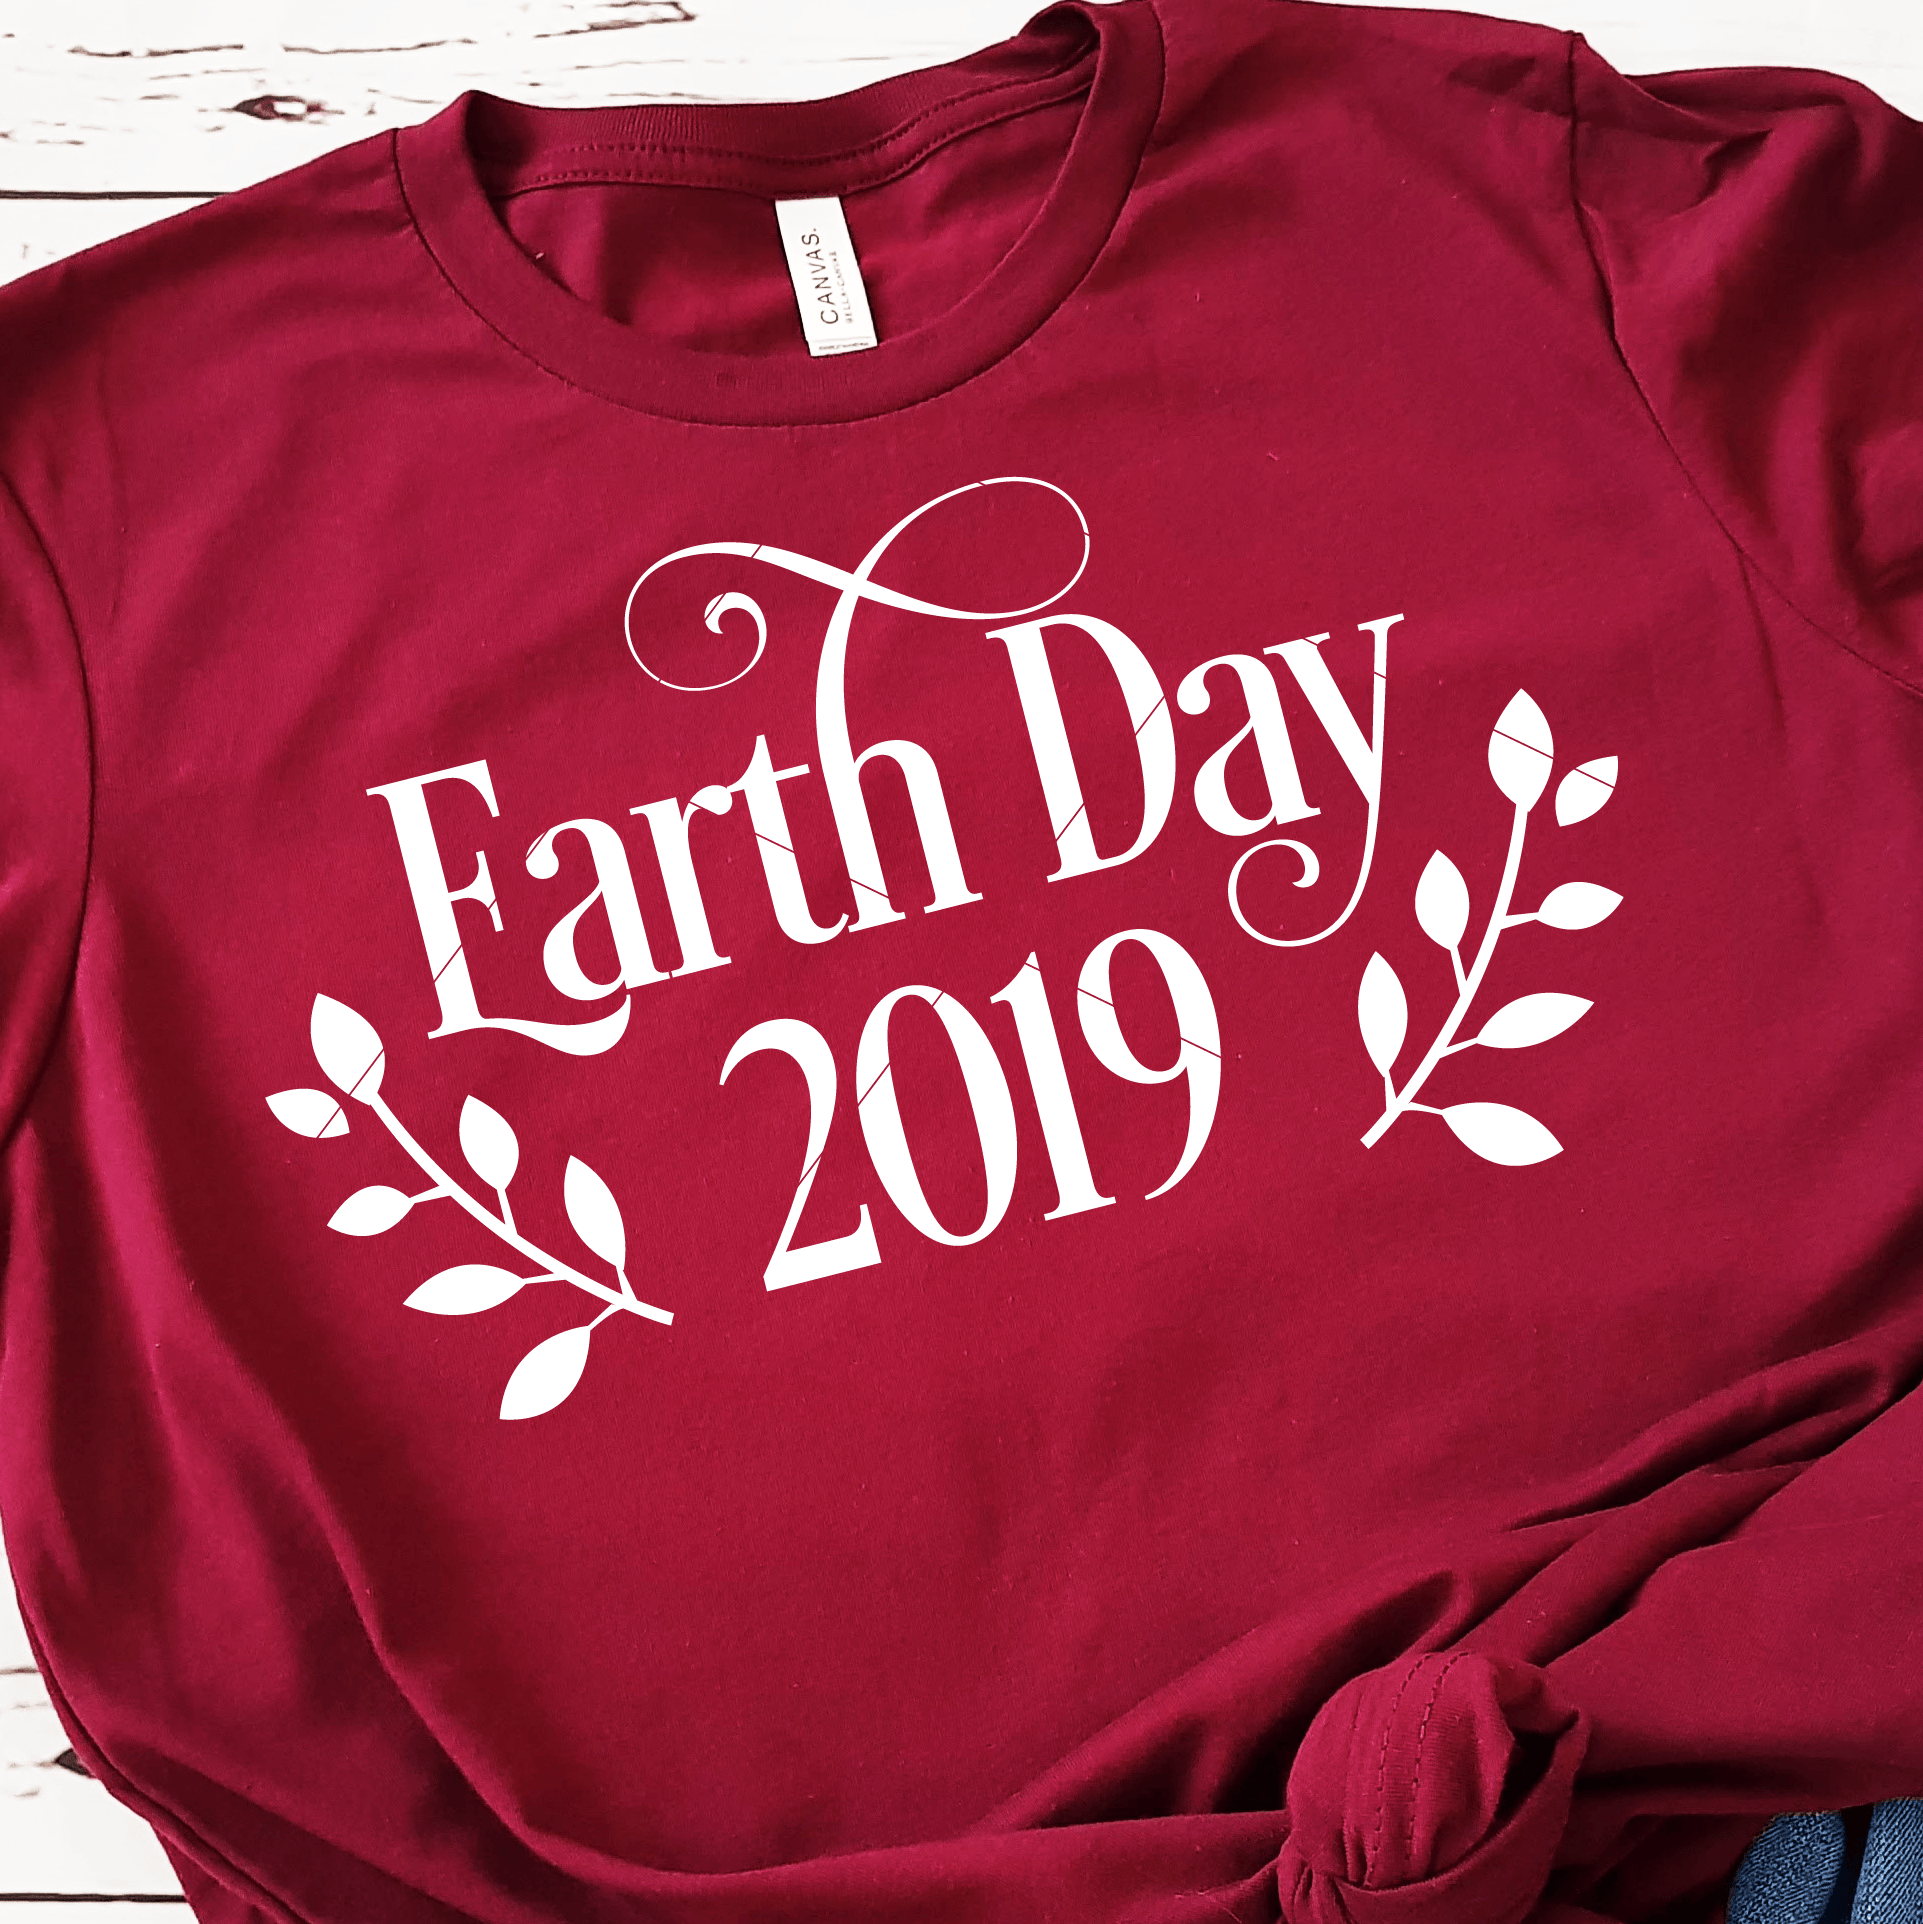 Earth Day With Date & Laurels SVG File - Commercial Use SVG Files for Cricut & Silhouette